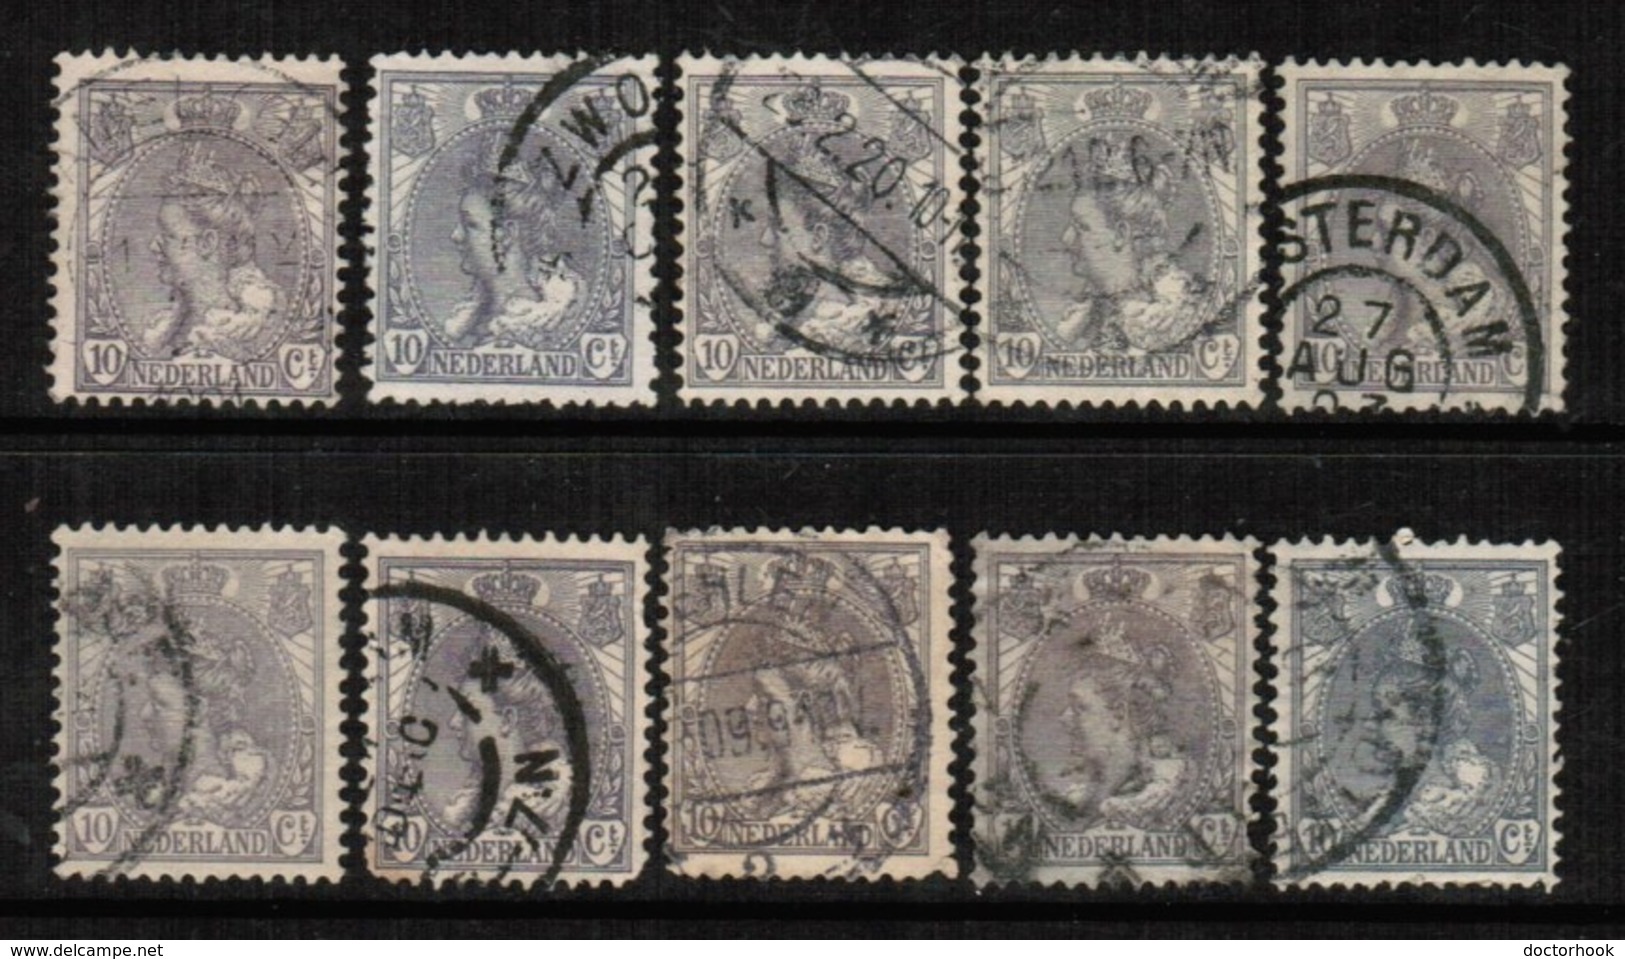 NETHERLANDS   Scott # 67 USED WHOLESALE LOT OF 10 (WH-226) - Lots & Kiloware (mixtures) - Max. 999 Stamps